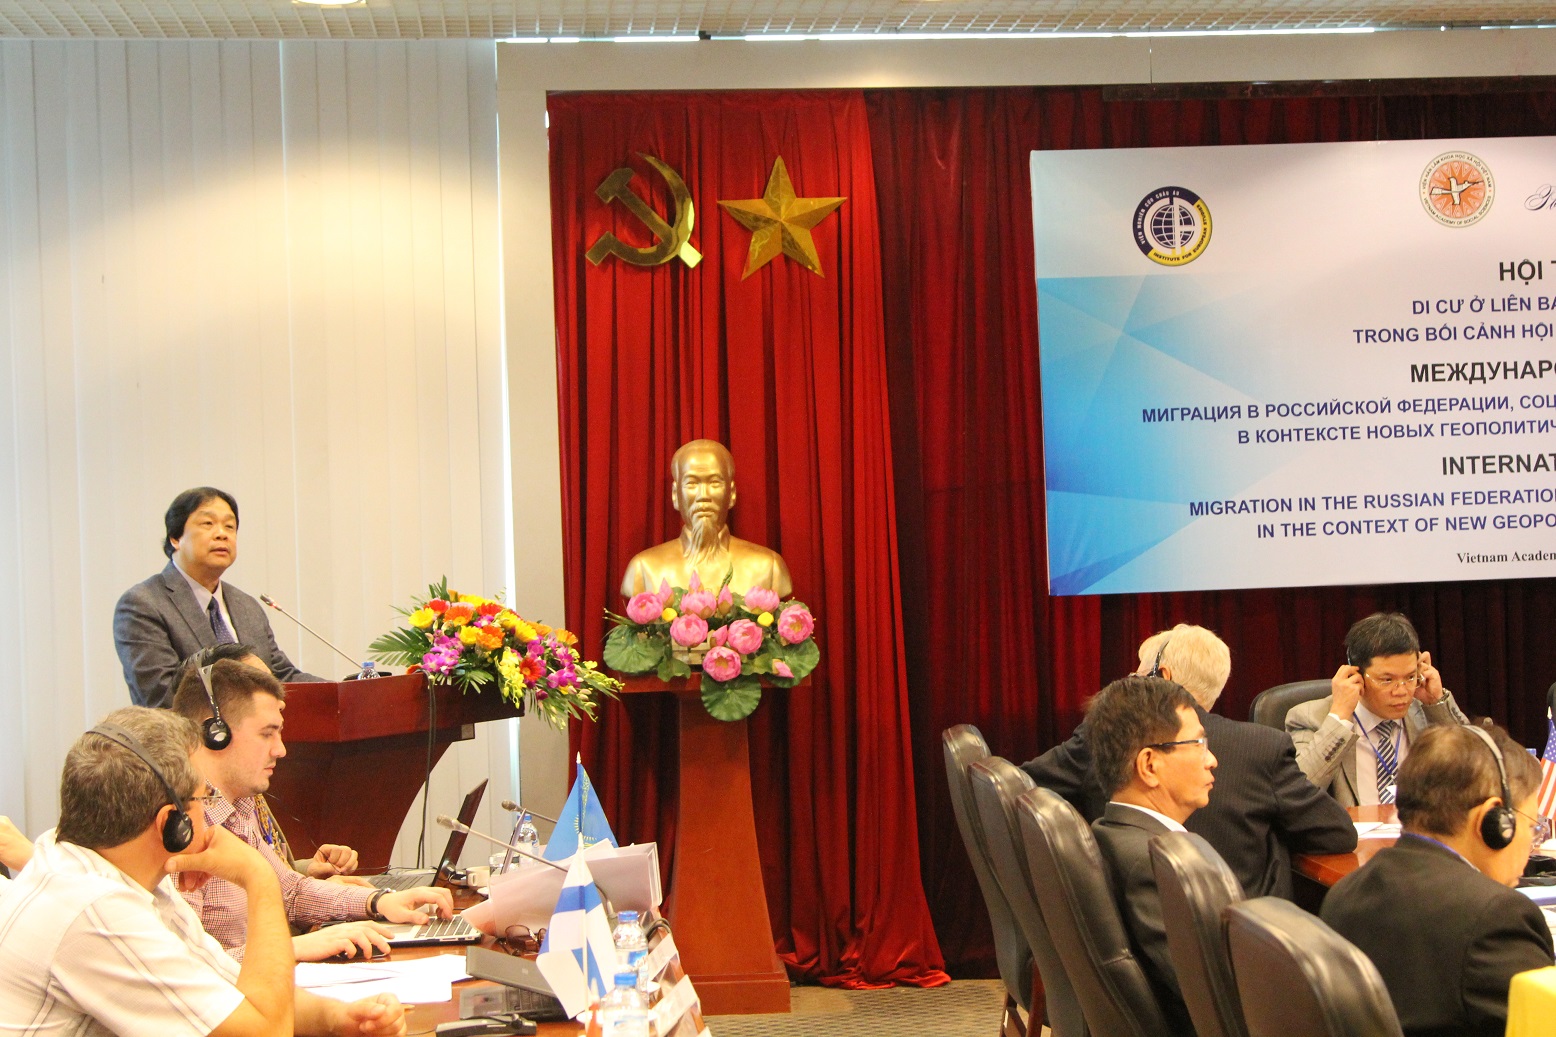 Assoc. Prof. Dr. Dang Nguyen Anh, Vice President of VASS<br>made an opening speech in the conference  